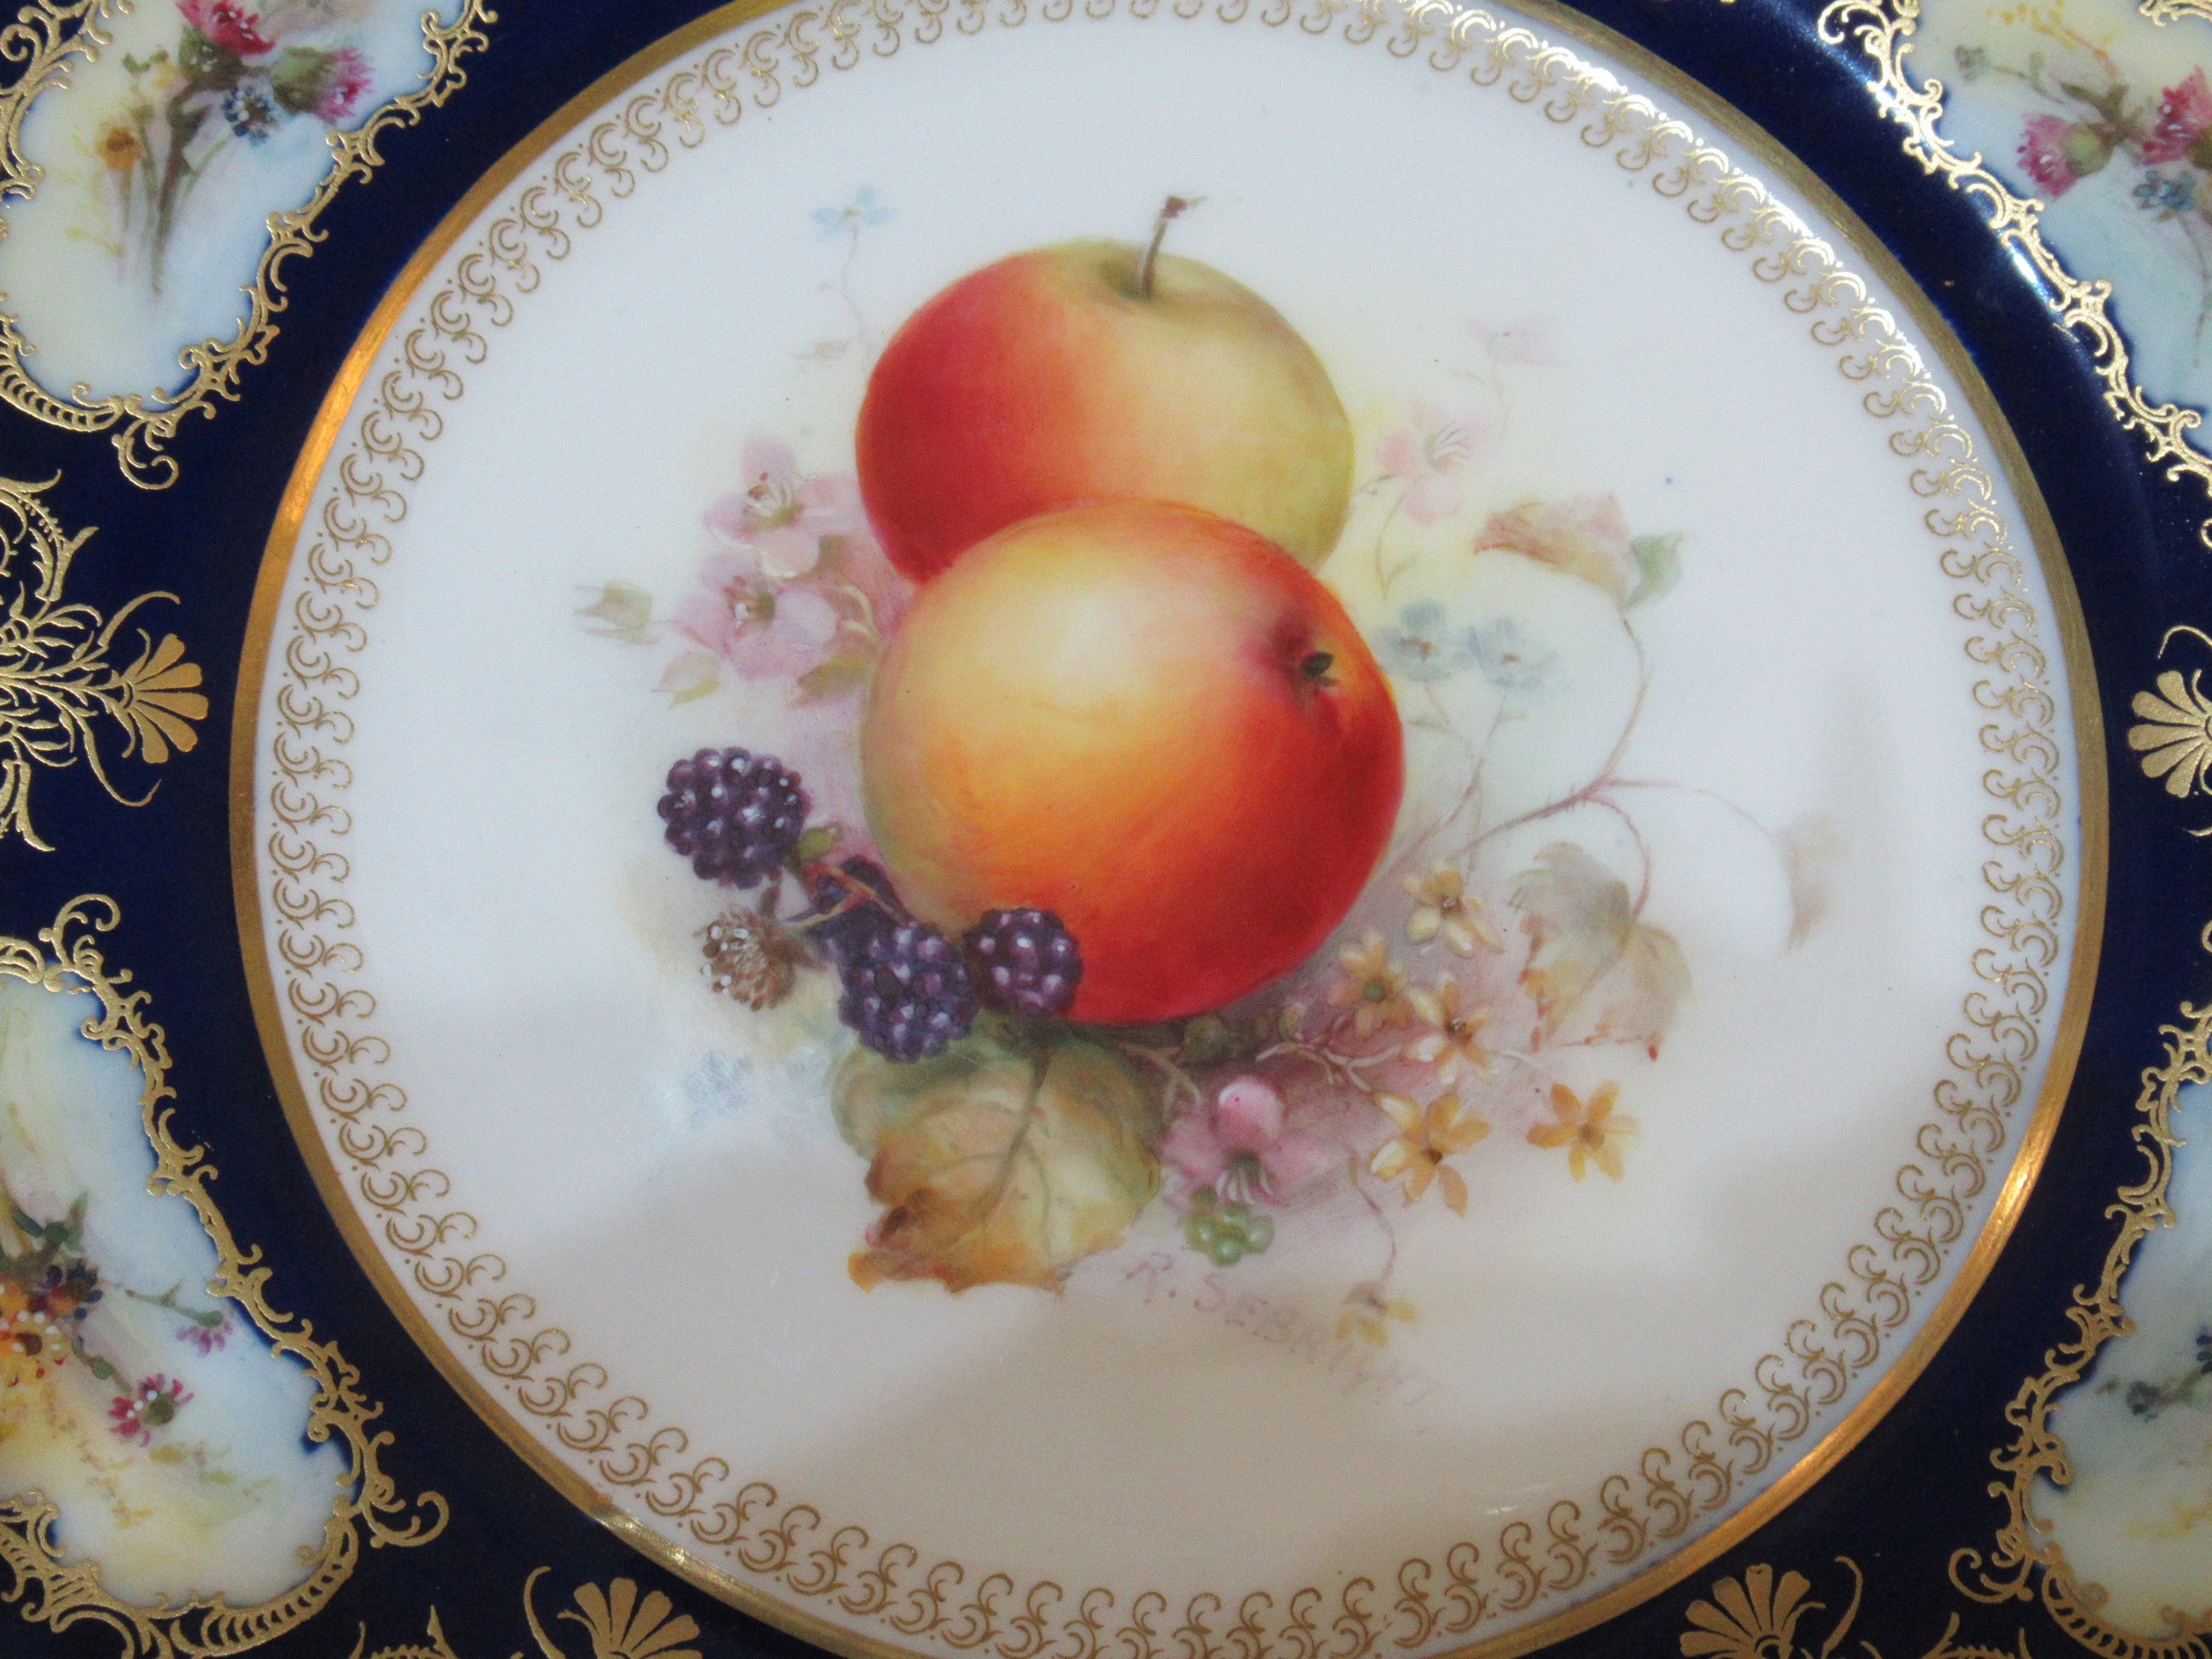 Royal Worcester porcelain cabinet plate hand painted with fruits and foliage with cobalt blue border - Image 5 of 6